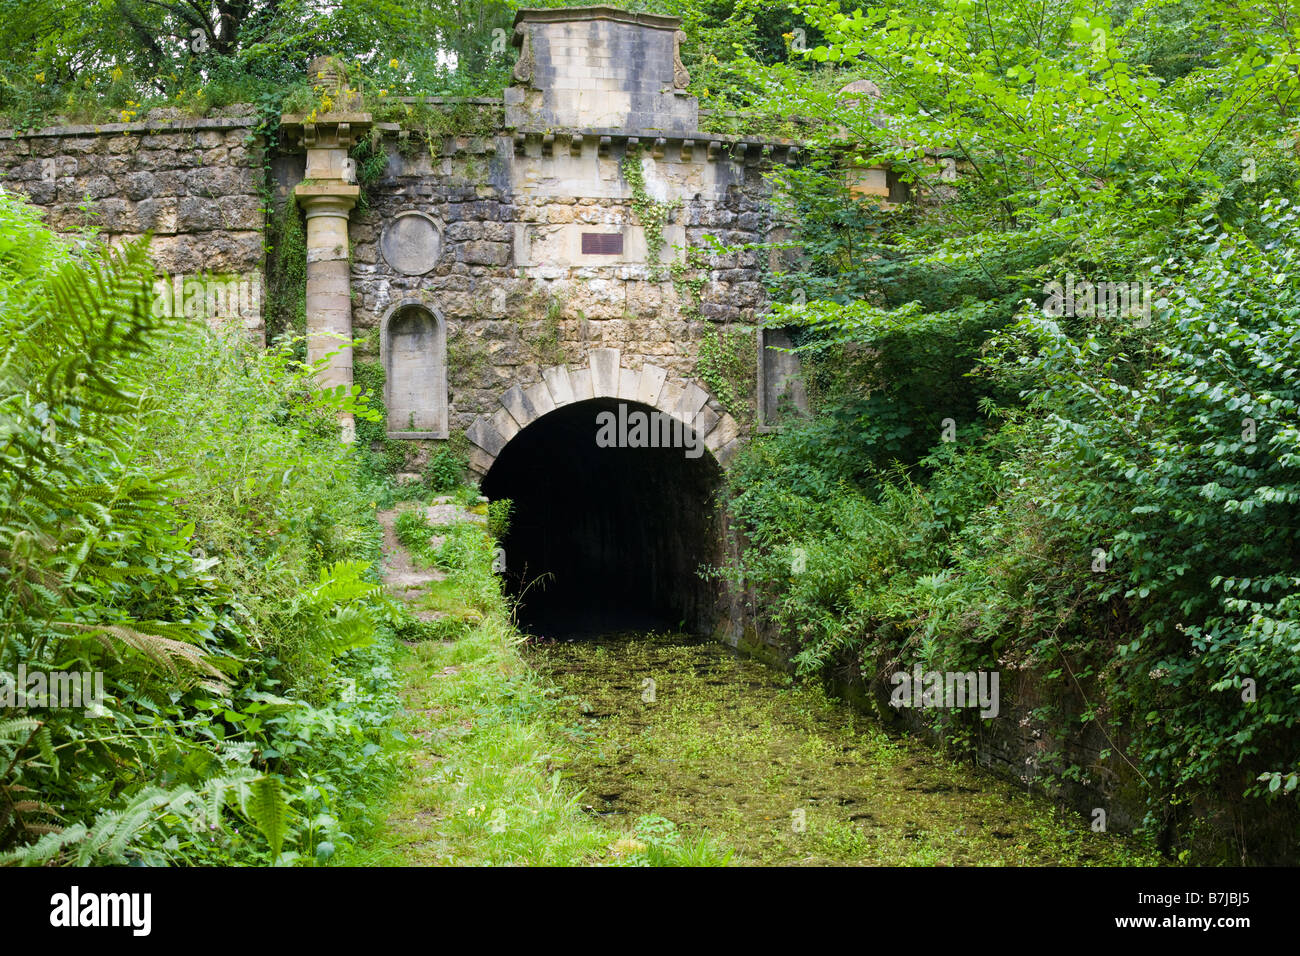 The Coates portal to the Sapperton Tunnel on the Thames Severn Canal, Coates, Gloucestershire Stock Photo